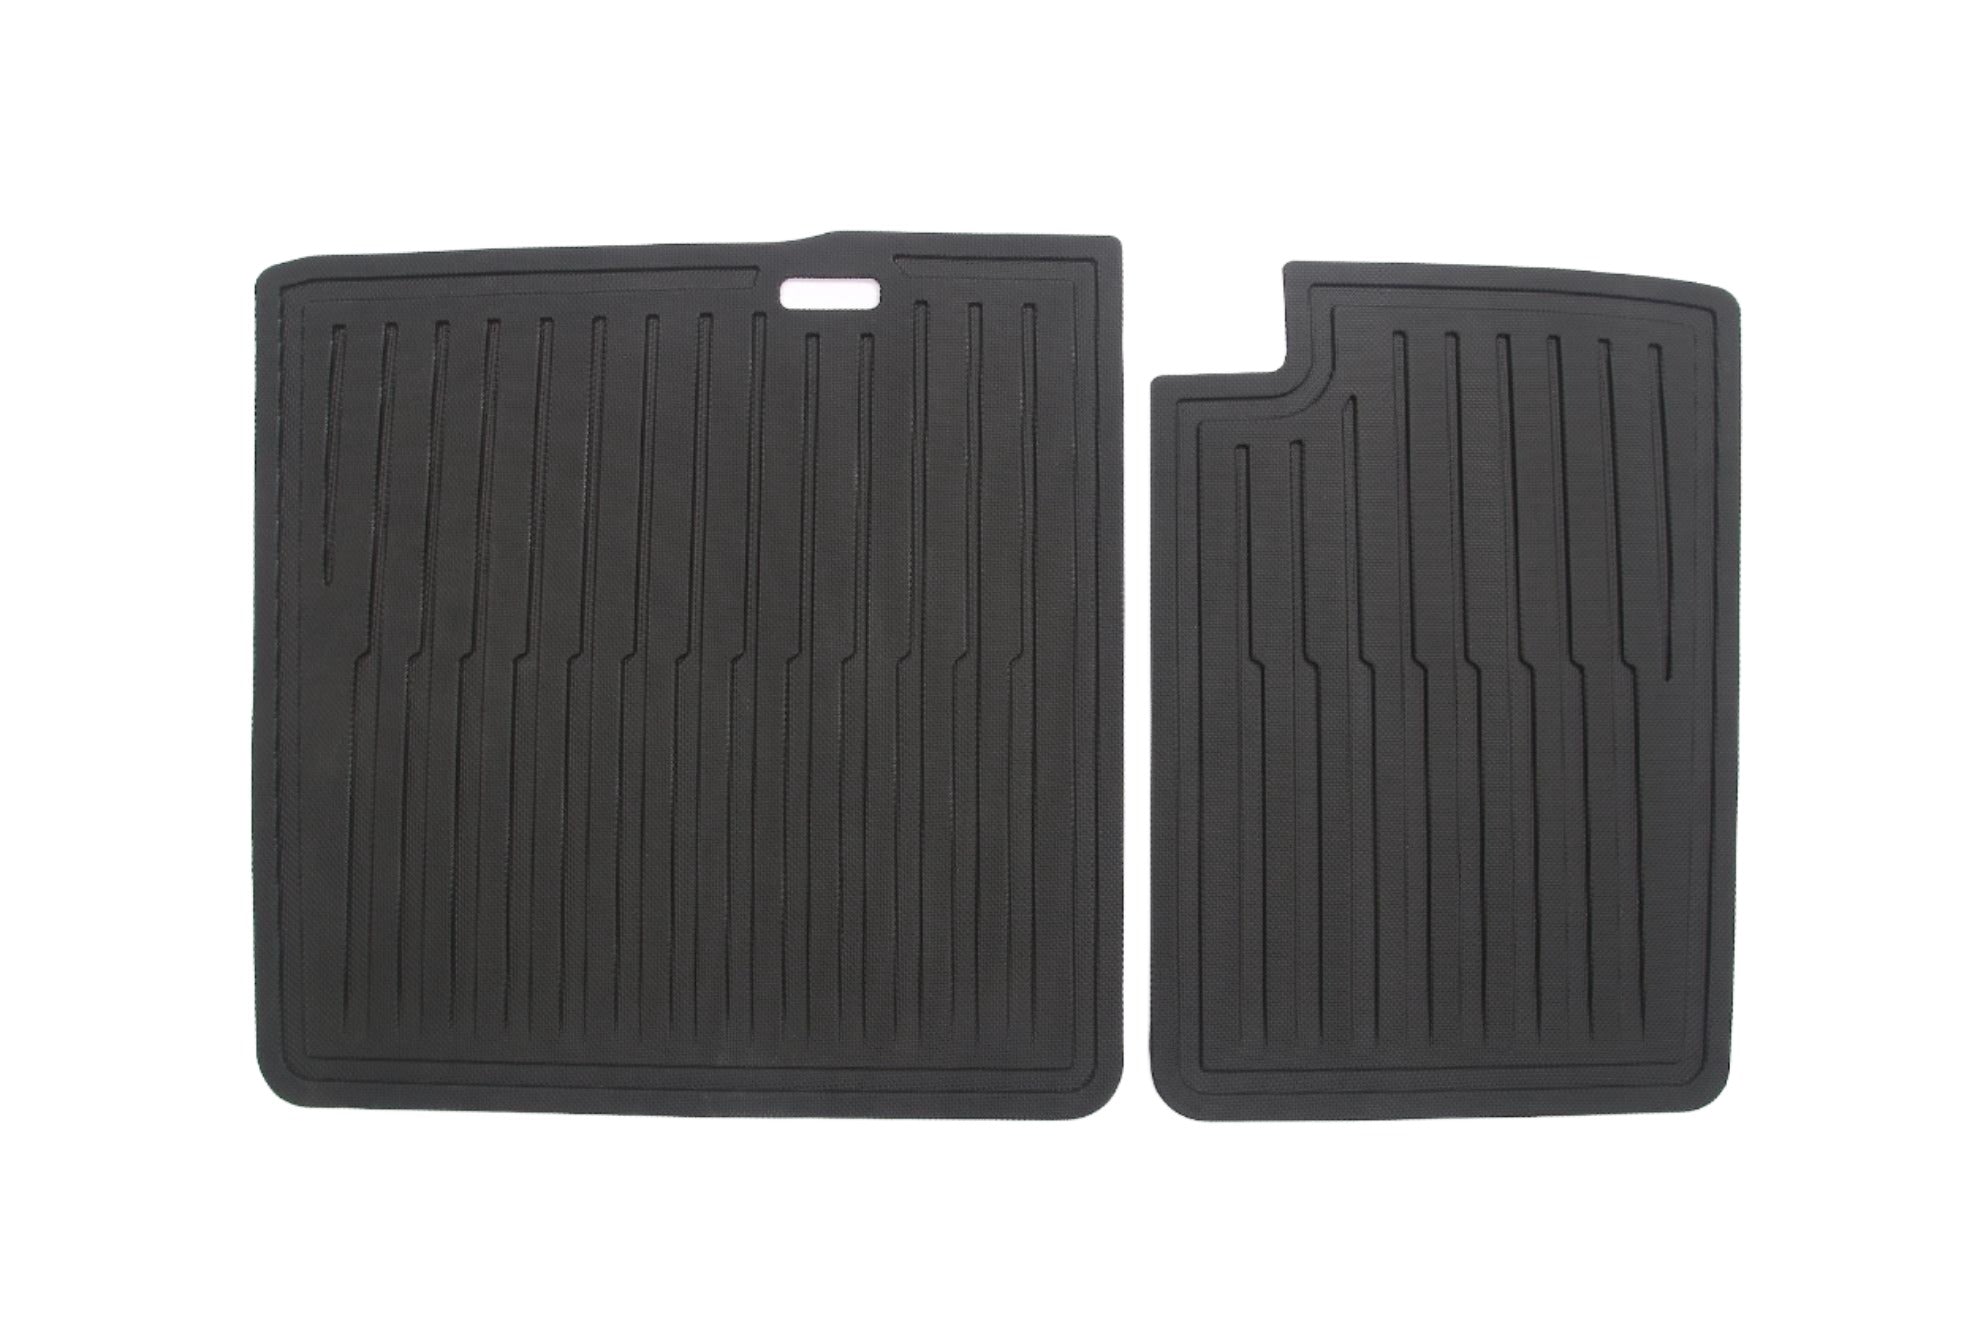 Rear Seat Back Protector Mats For Model 3 - TESDADDY